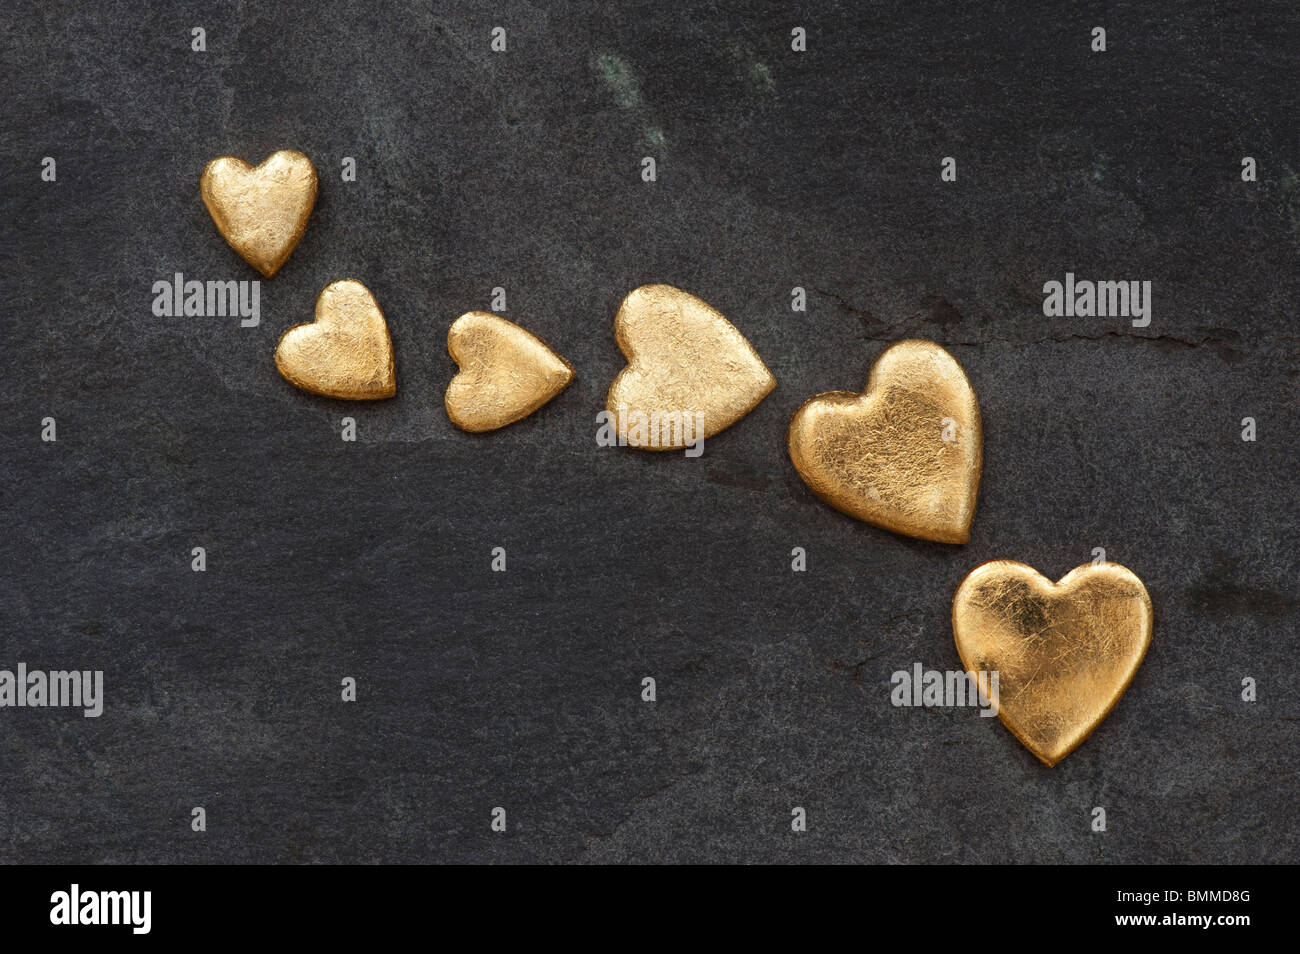 Gold heart shapes against slate background Stock Photo